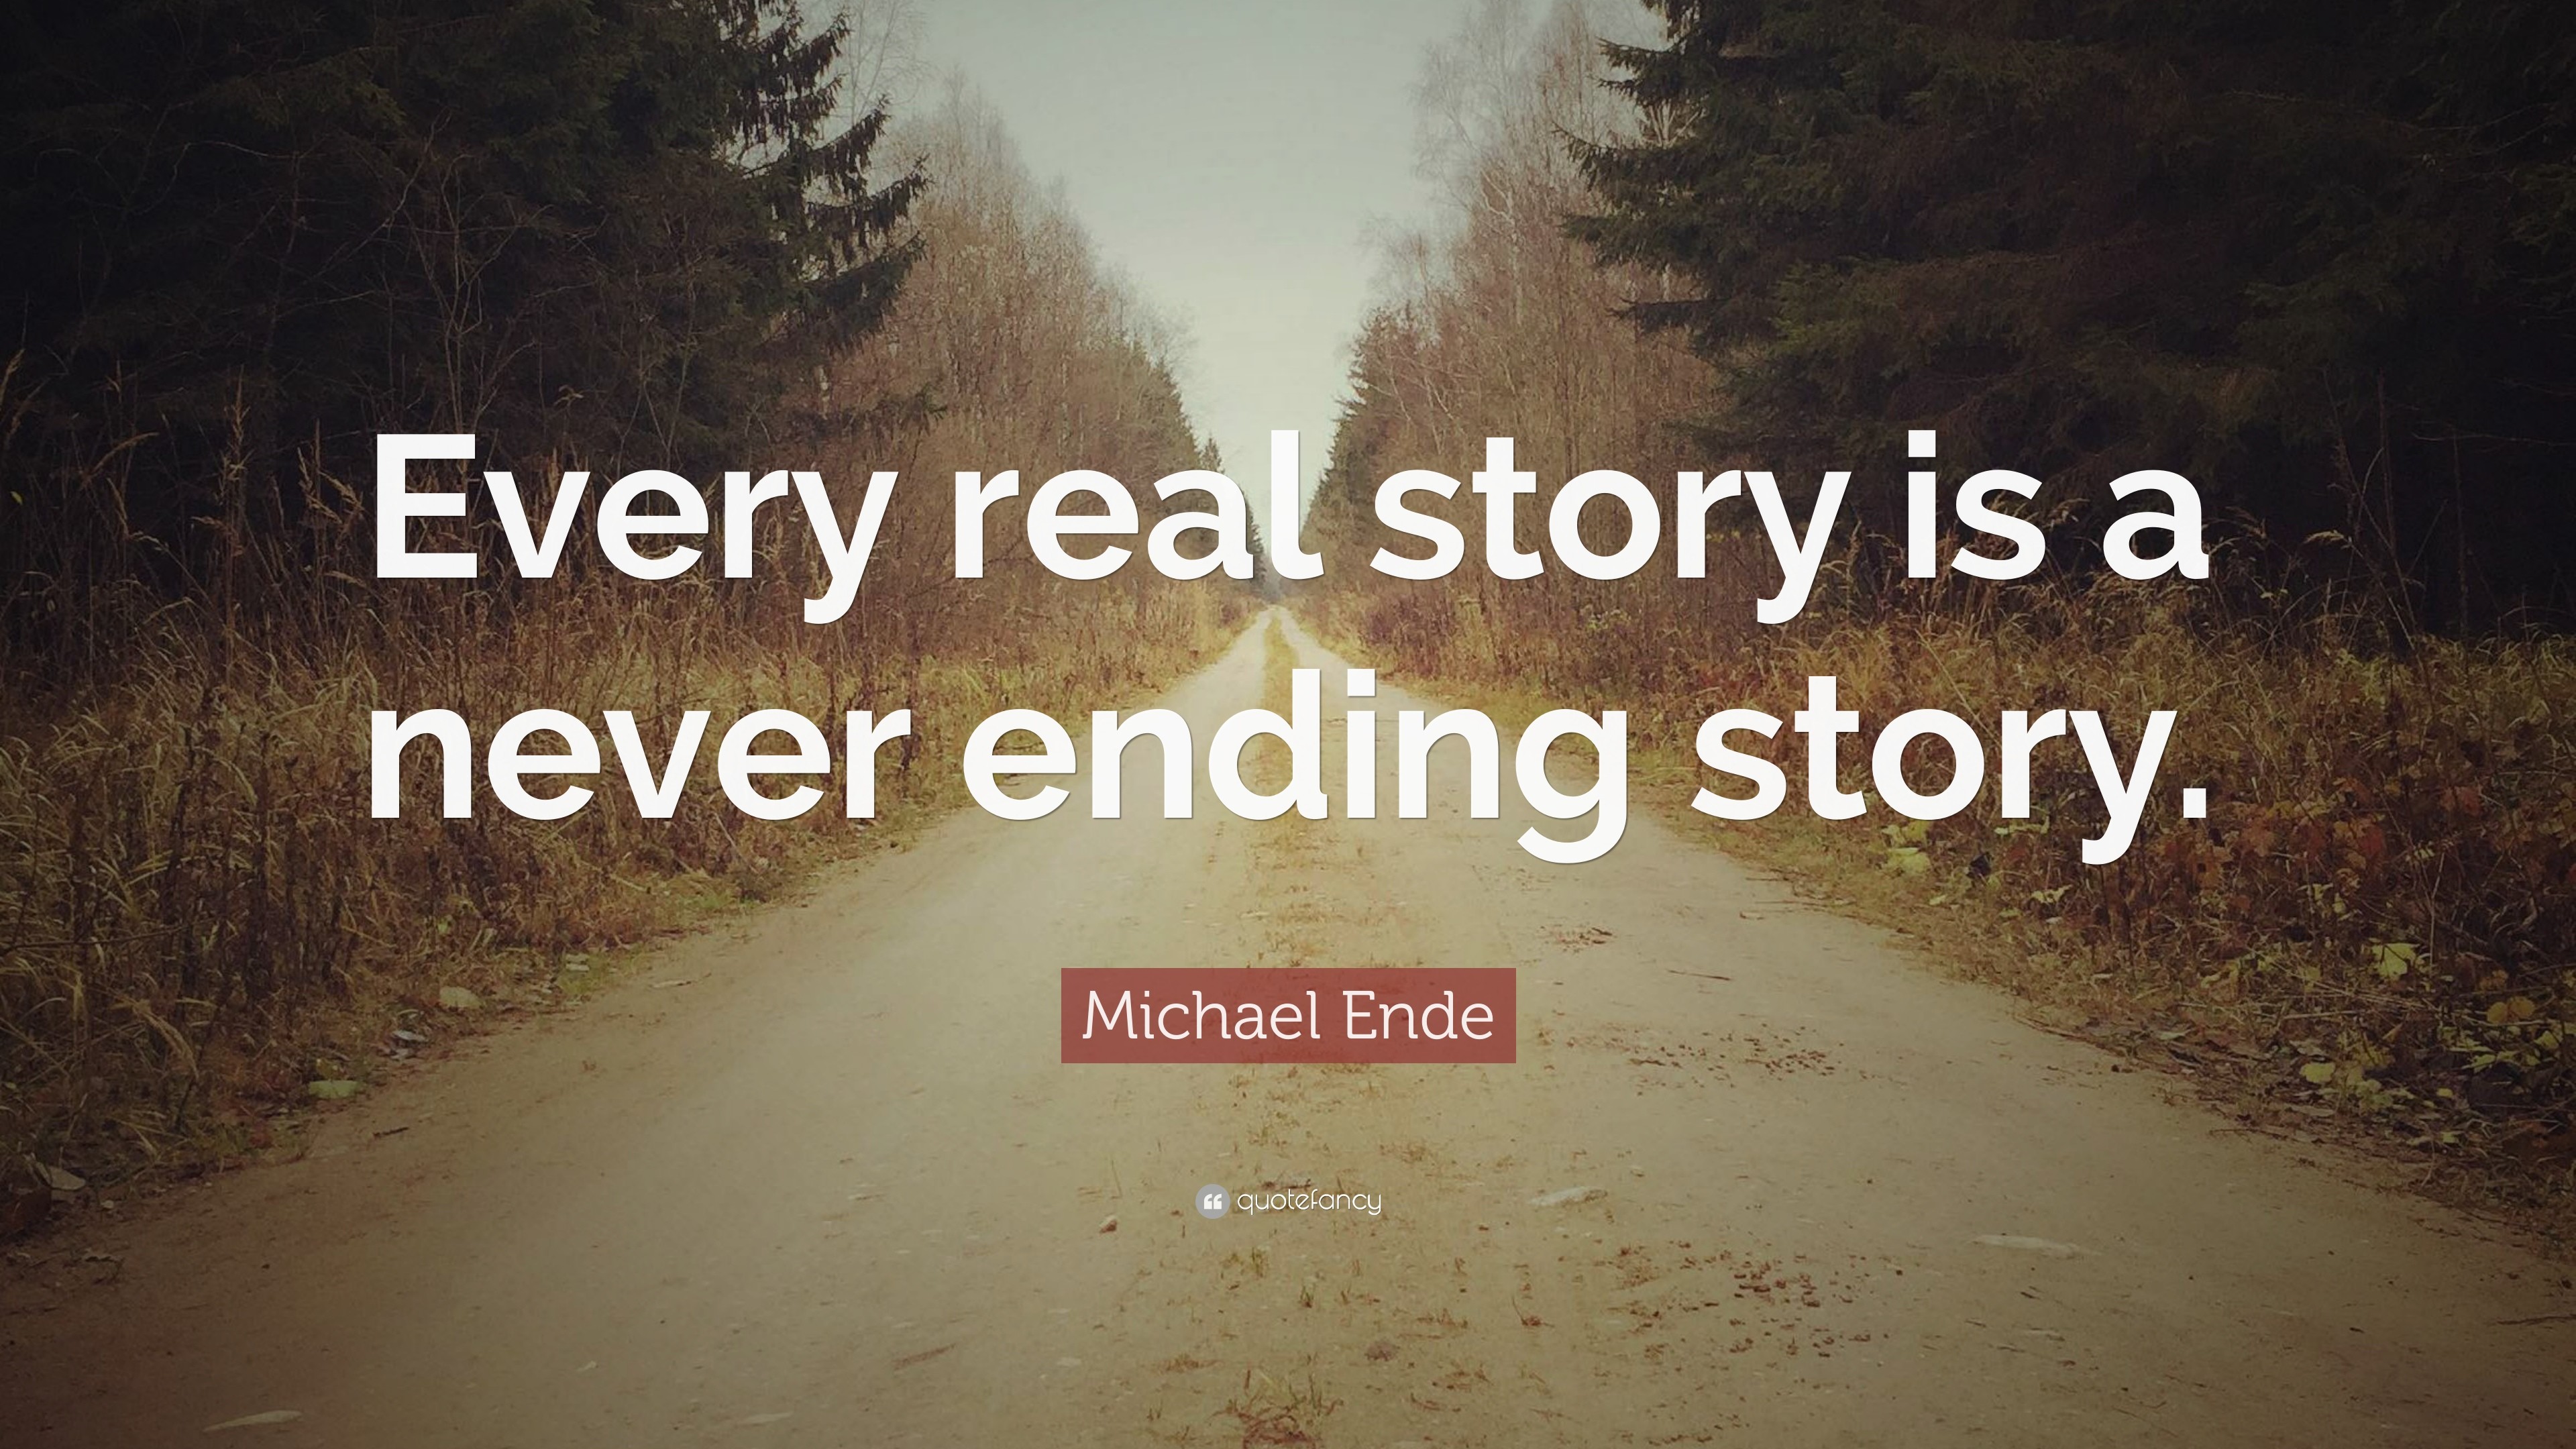 3840x2160 Michael Ende Quote: “Every real story is a never ending story.”